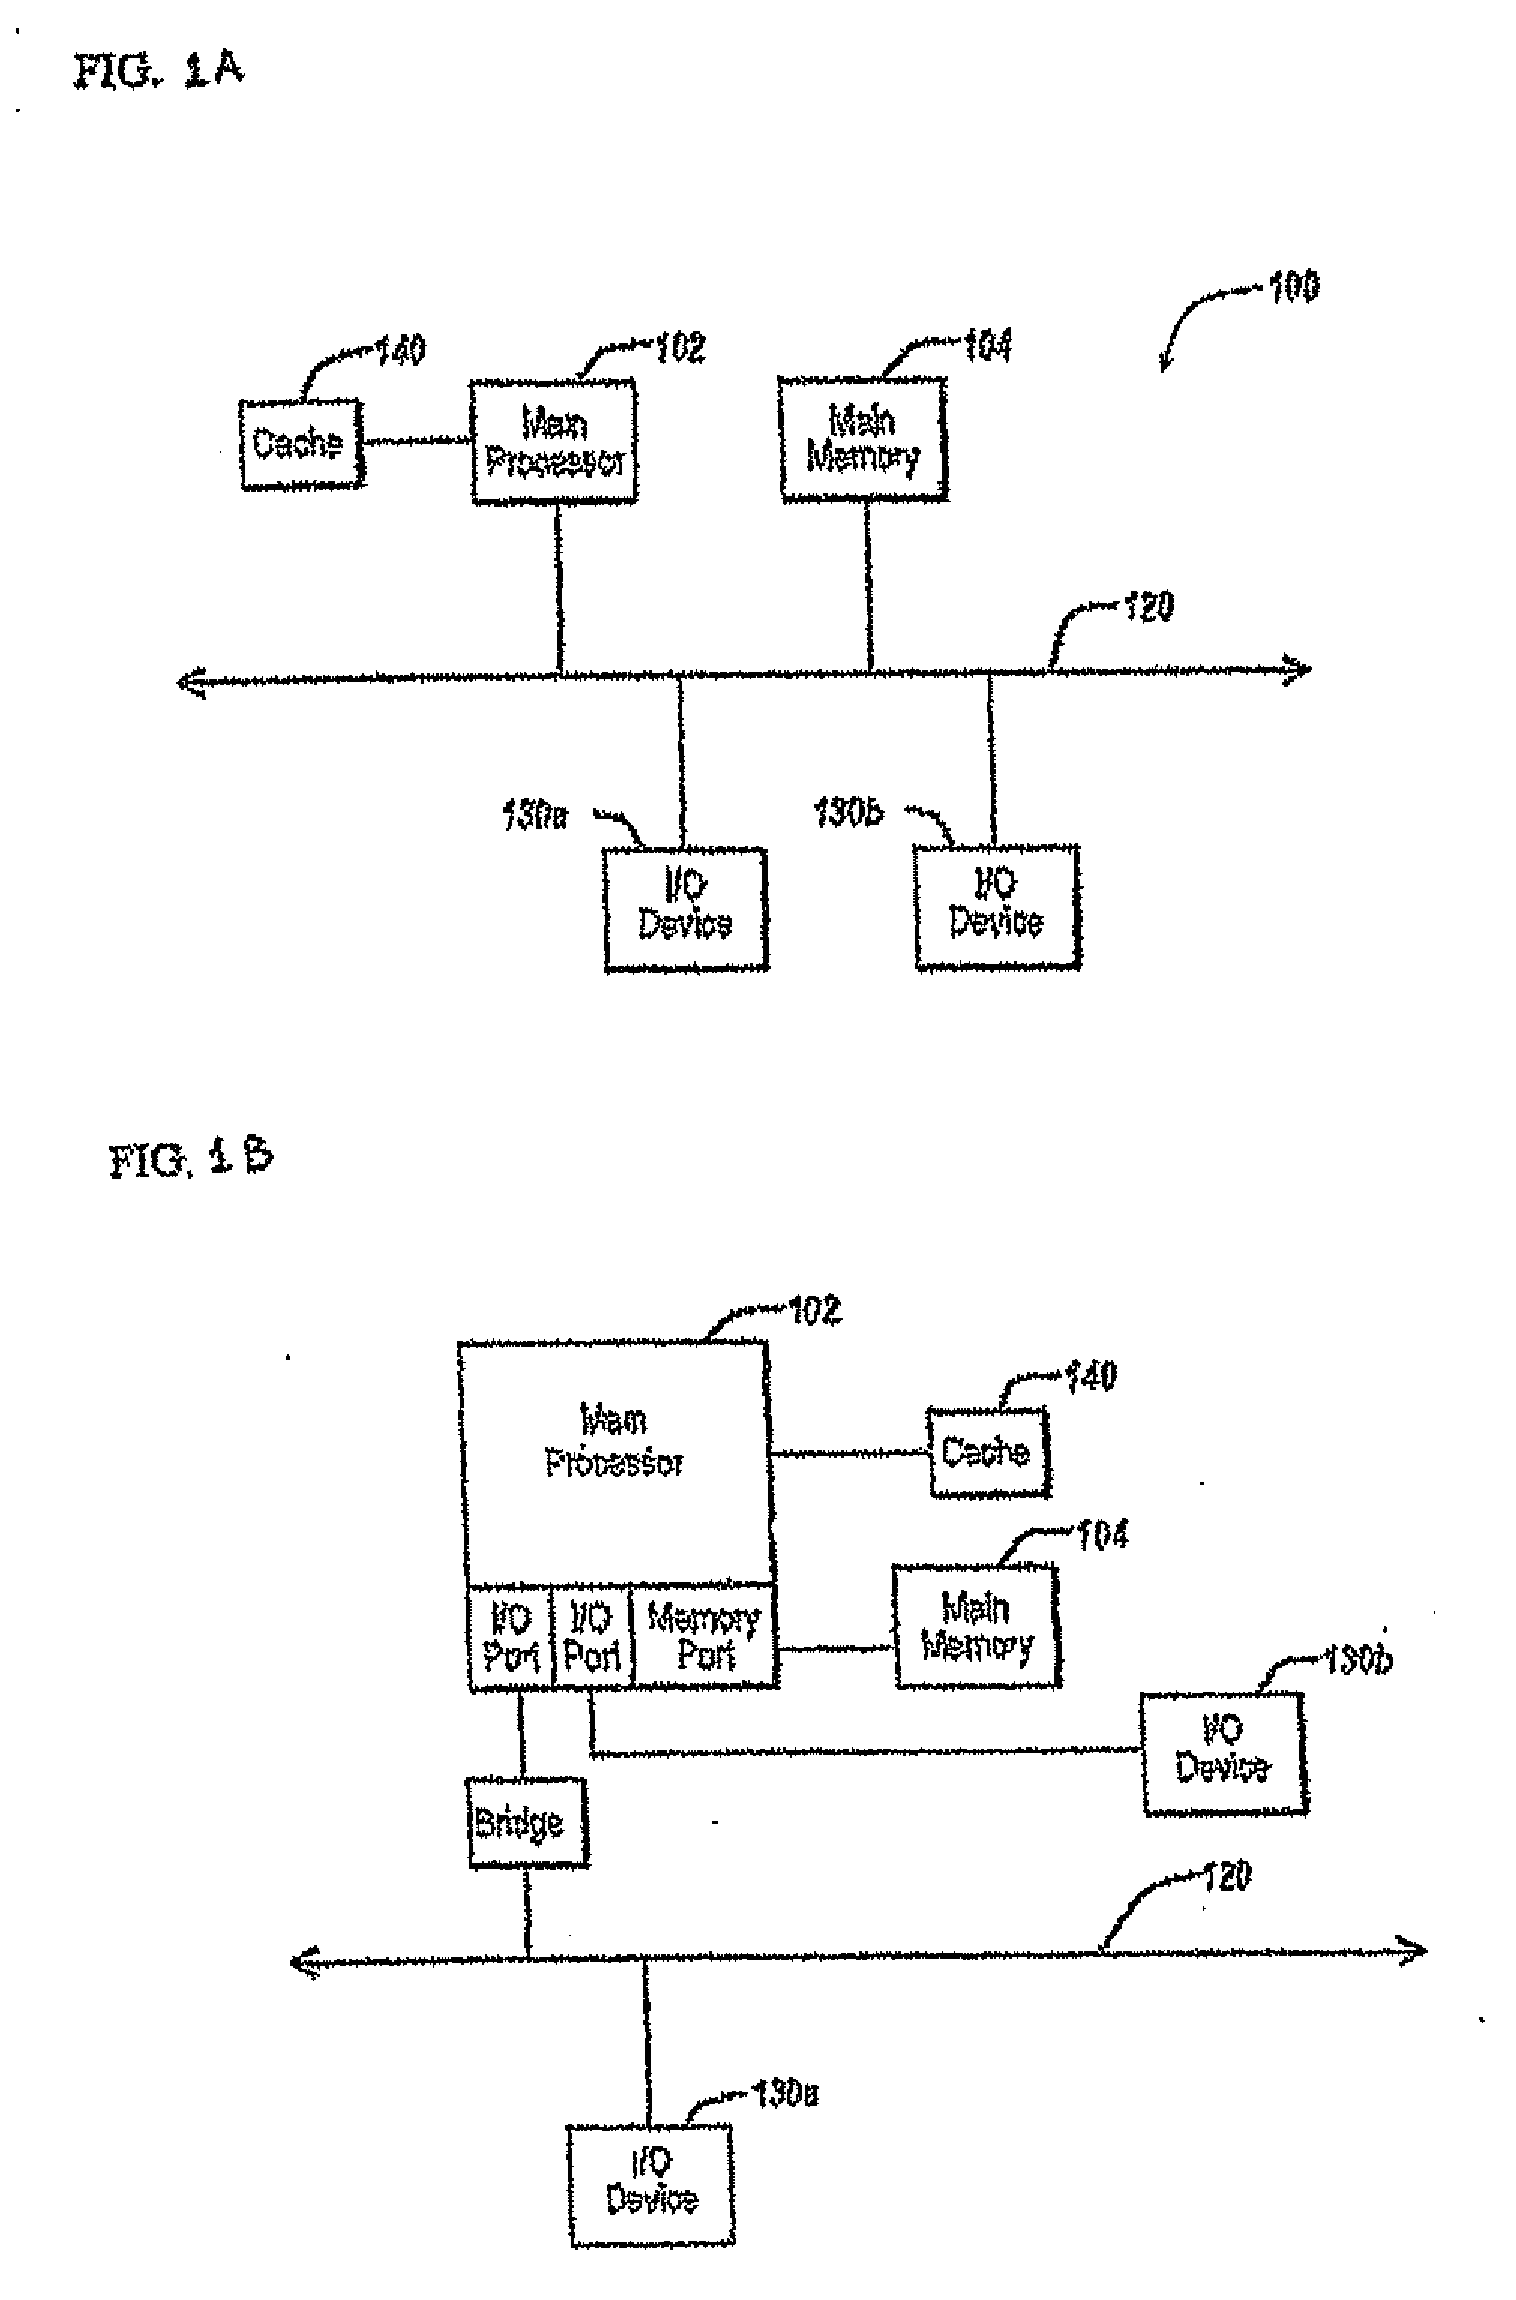 Methods and systems for providing access to a computing environment